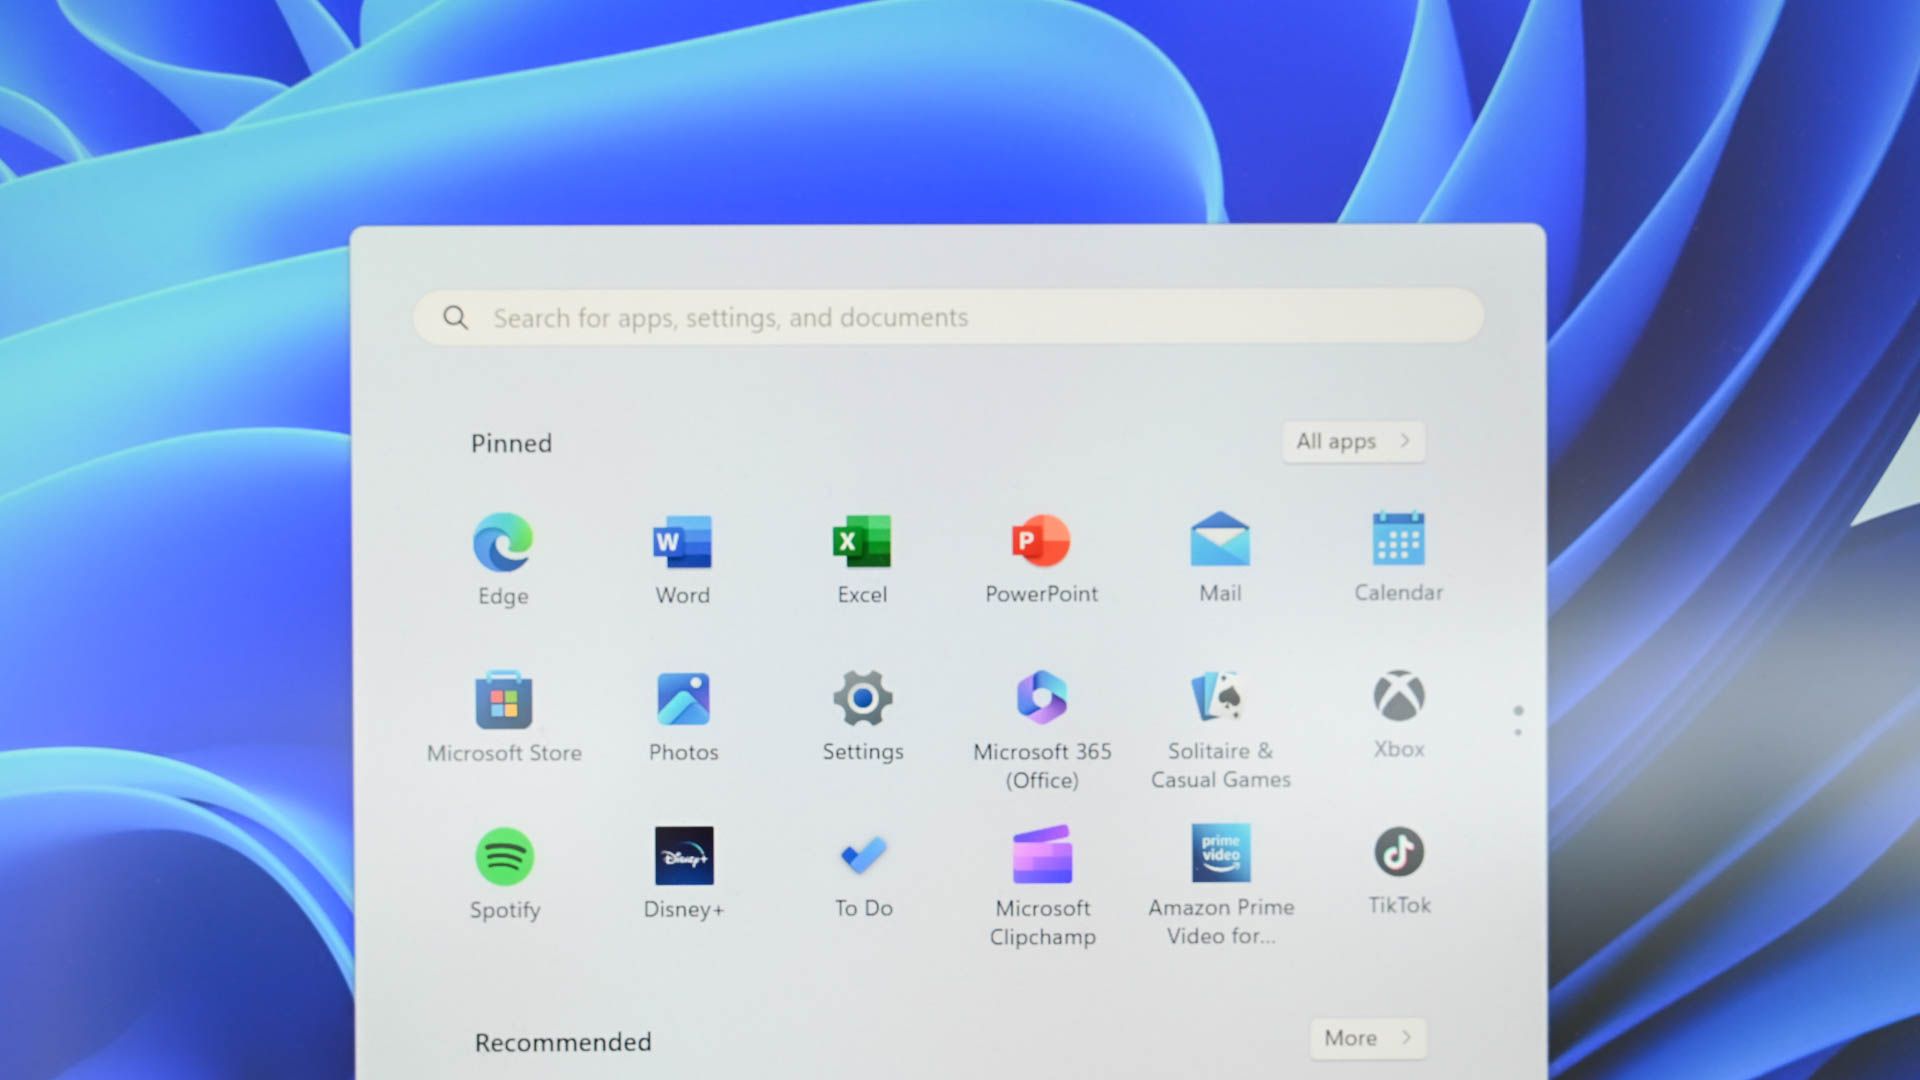 The Windows 11 Start Menu with a few apps that use XML based files, like Word and Excel.